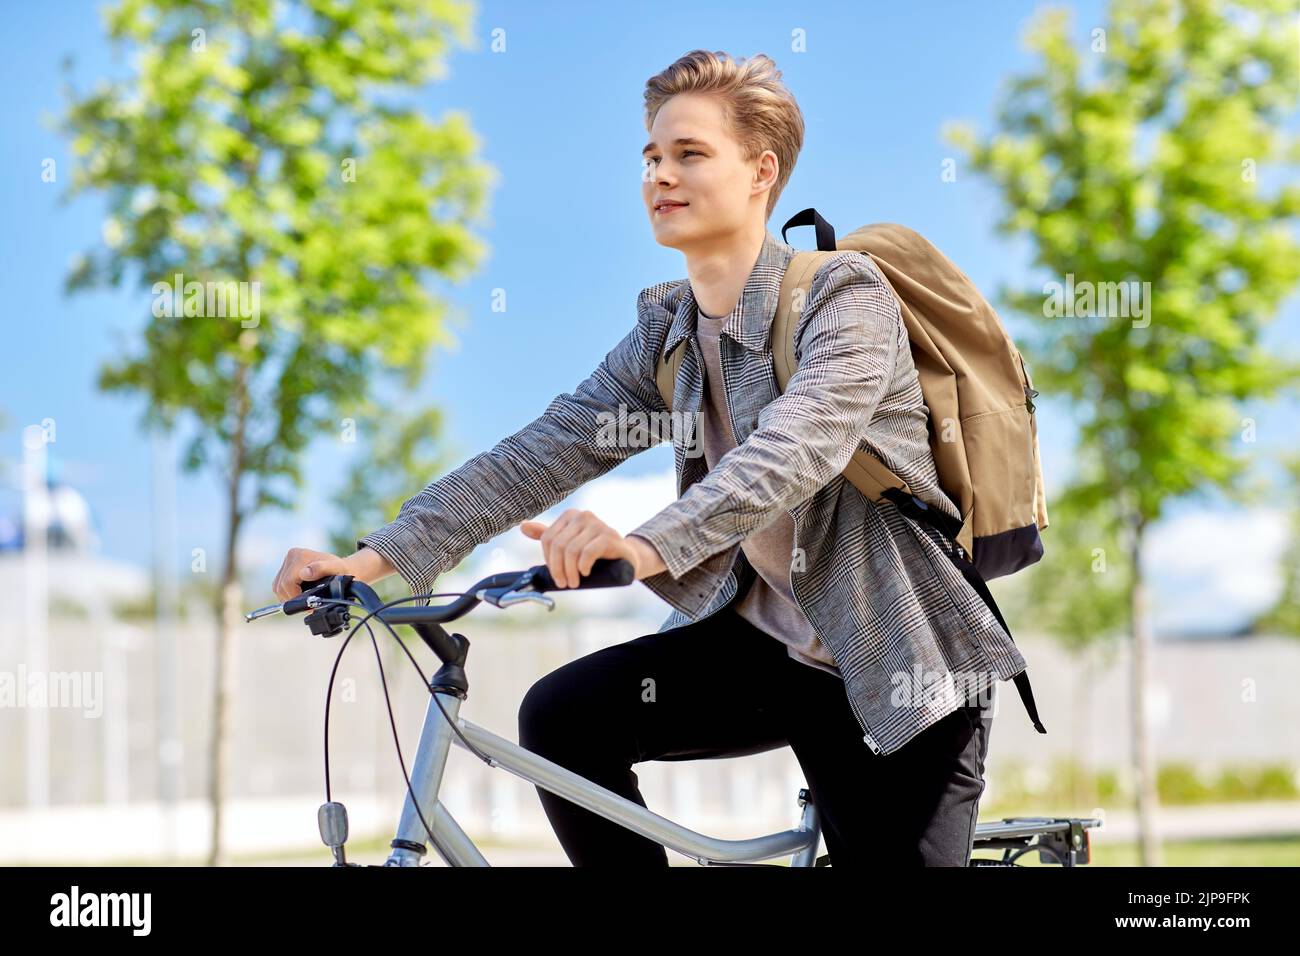 young man riding bicycle on city street Stock Photo